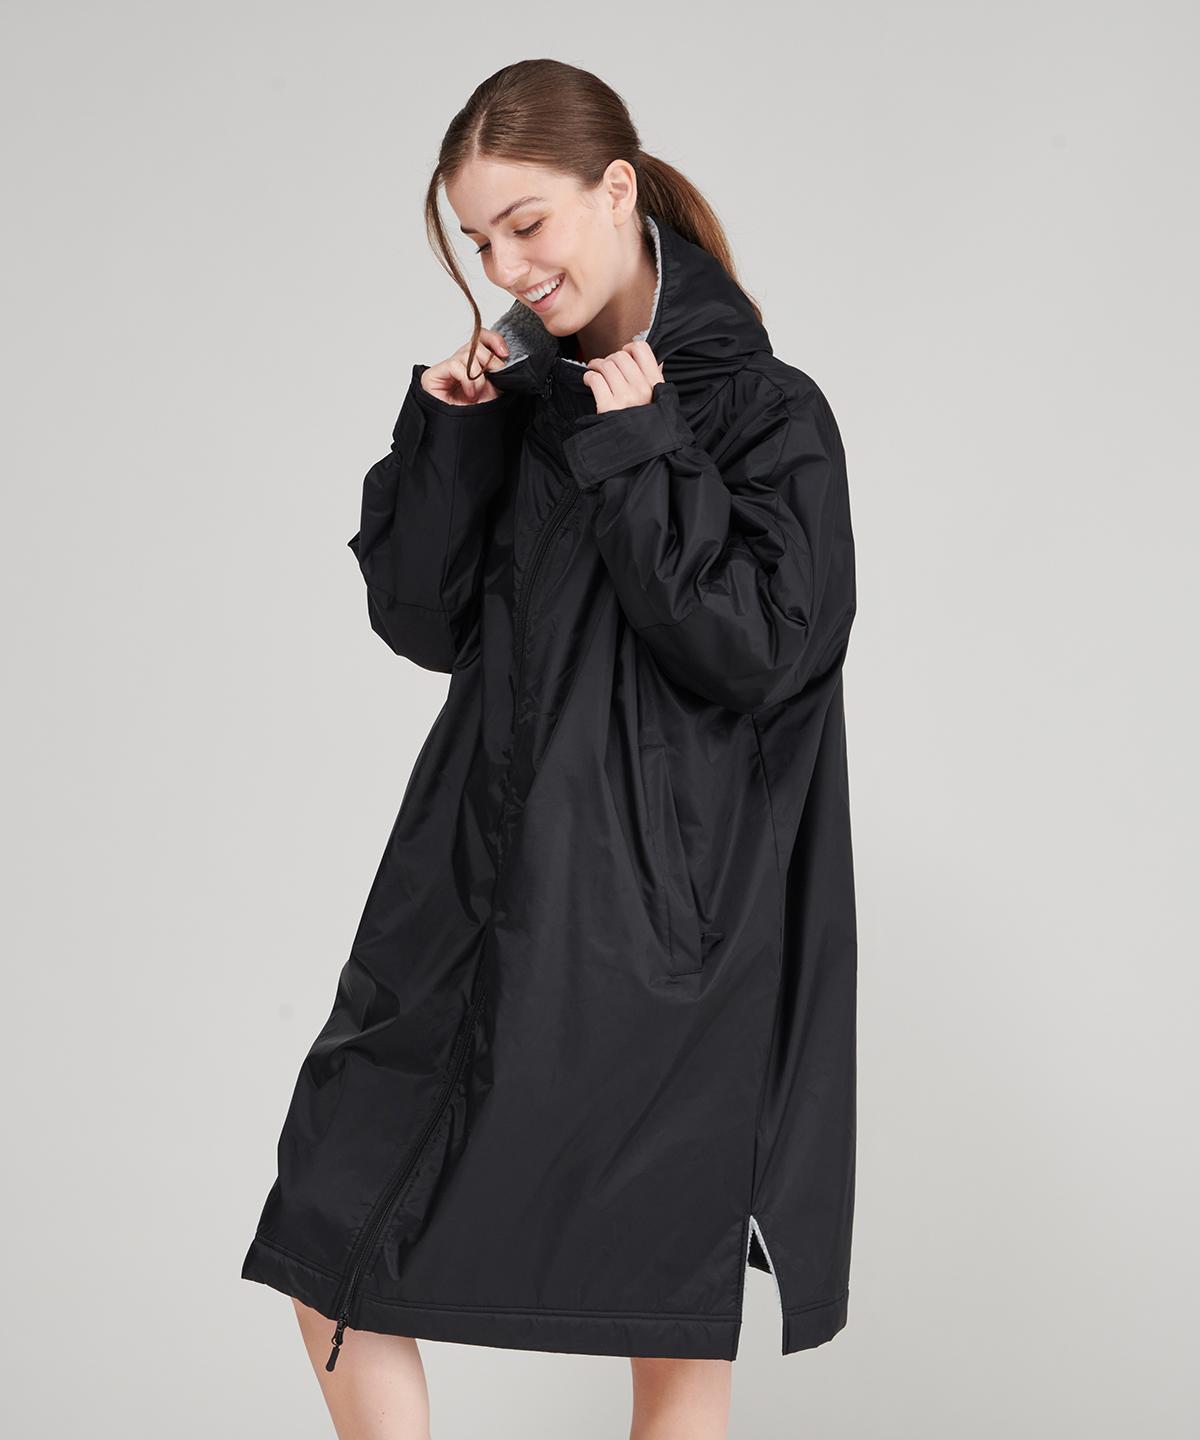 All-Weather Equi-Robe